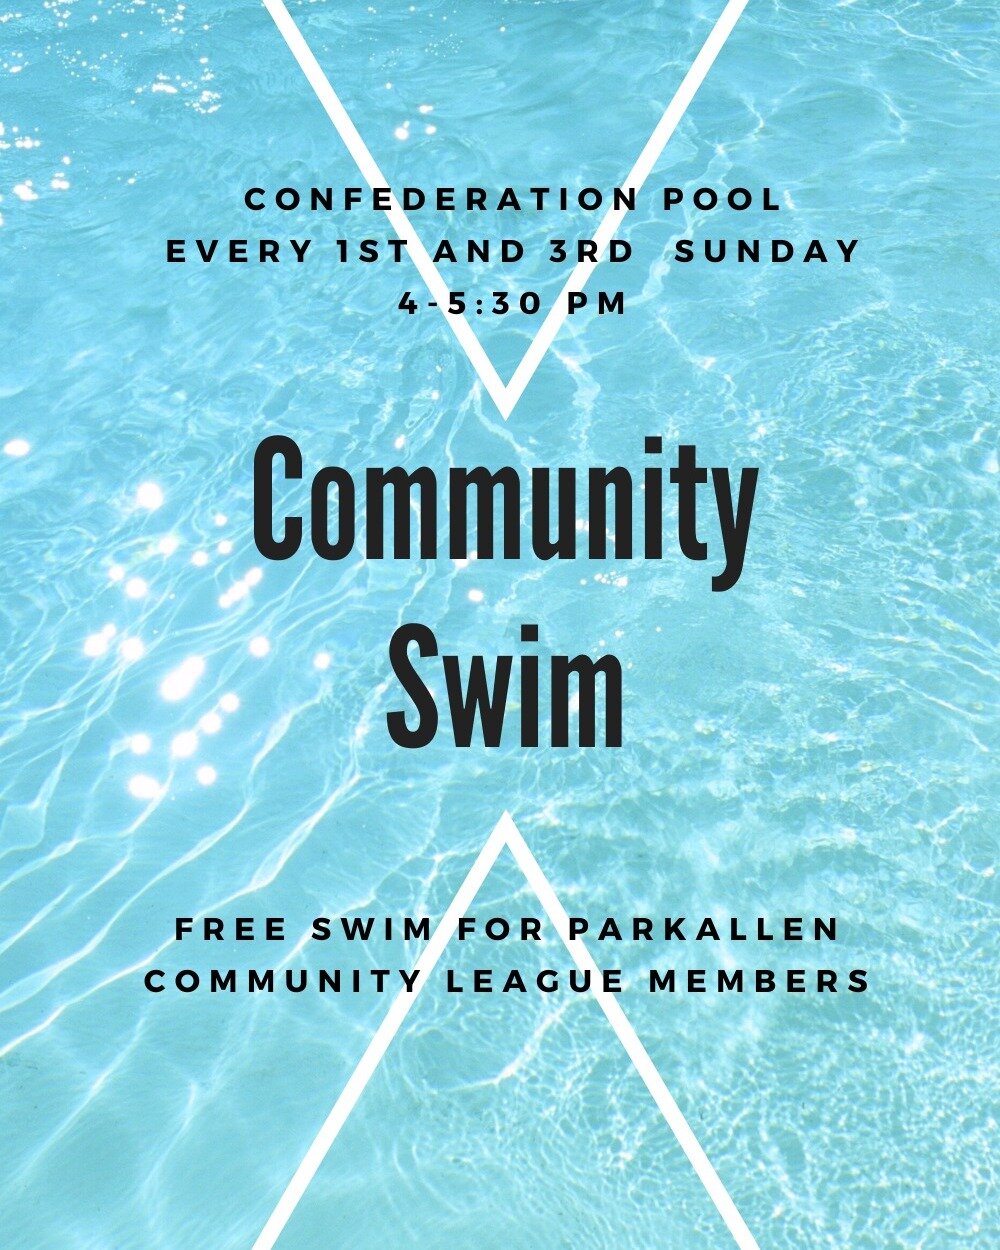 Parkallen Community League members show your membership card at Confederation Pool for a free swim! Community swim 4-5:30 p.m. on the 1st and 3rd Sunday of every month.